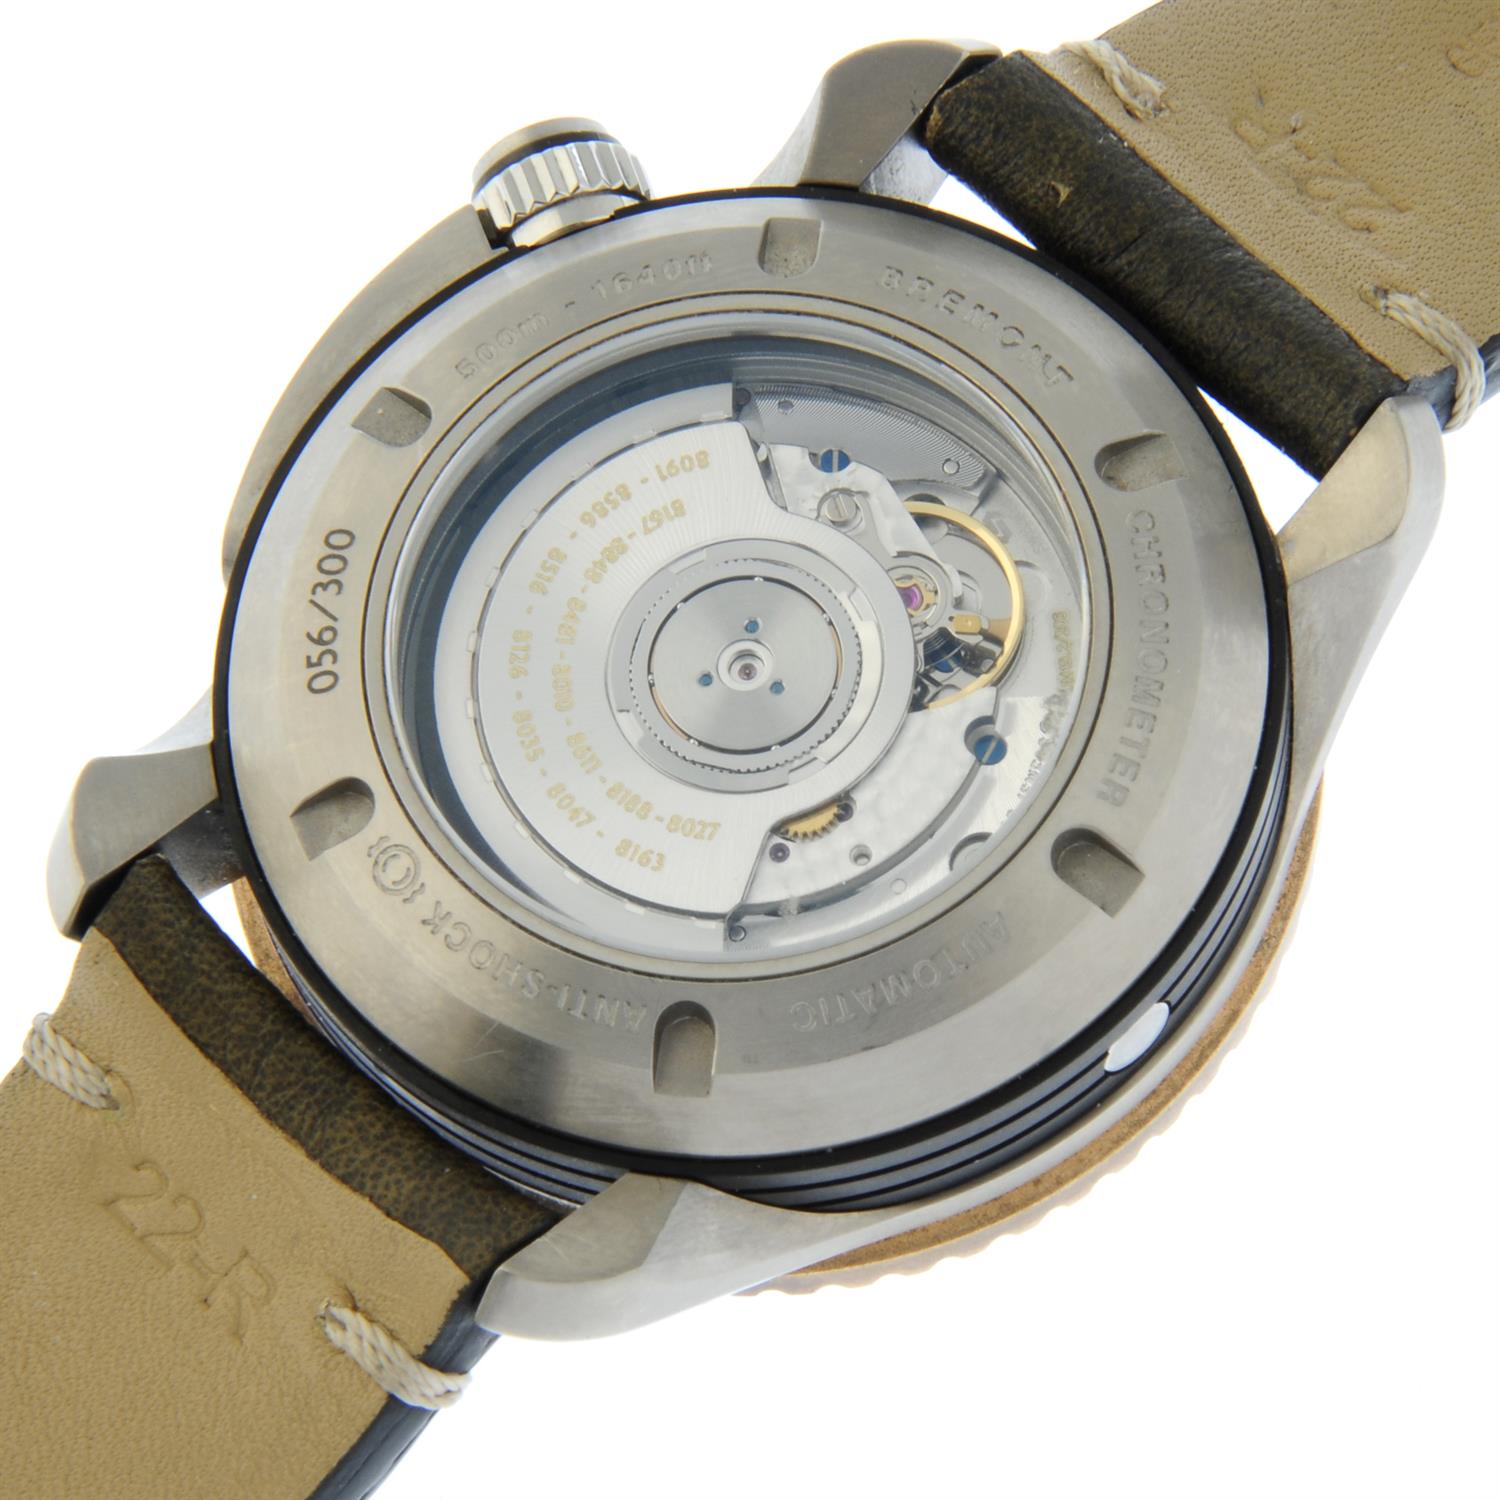 Bremont - a Project Possible watch, 44mm. - Image 4 of 4